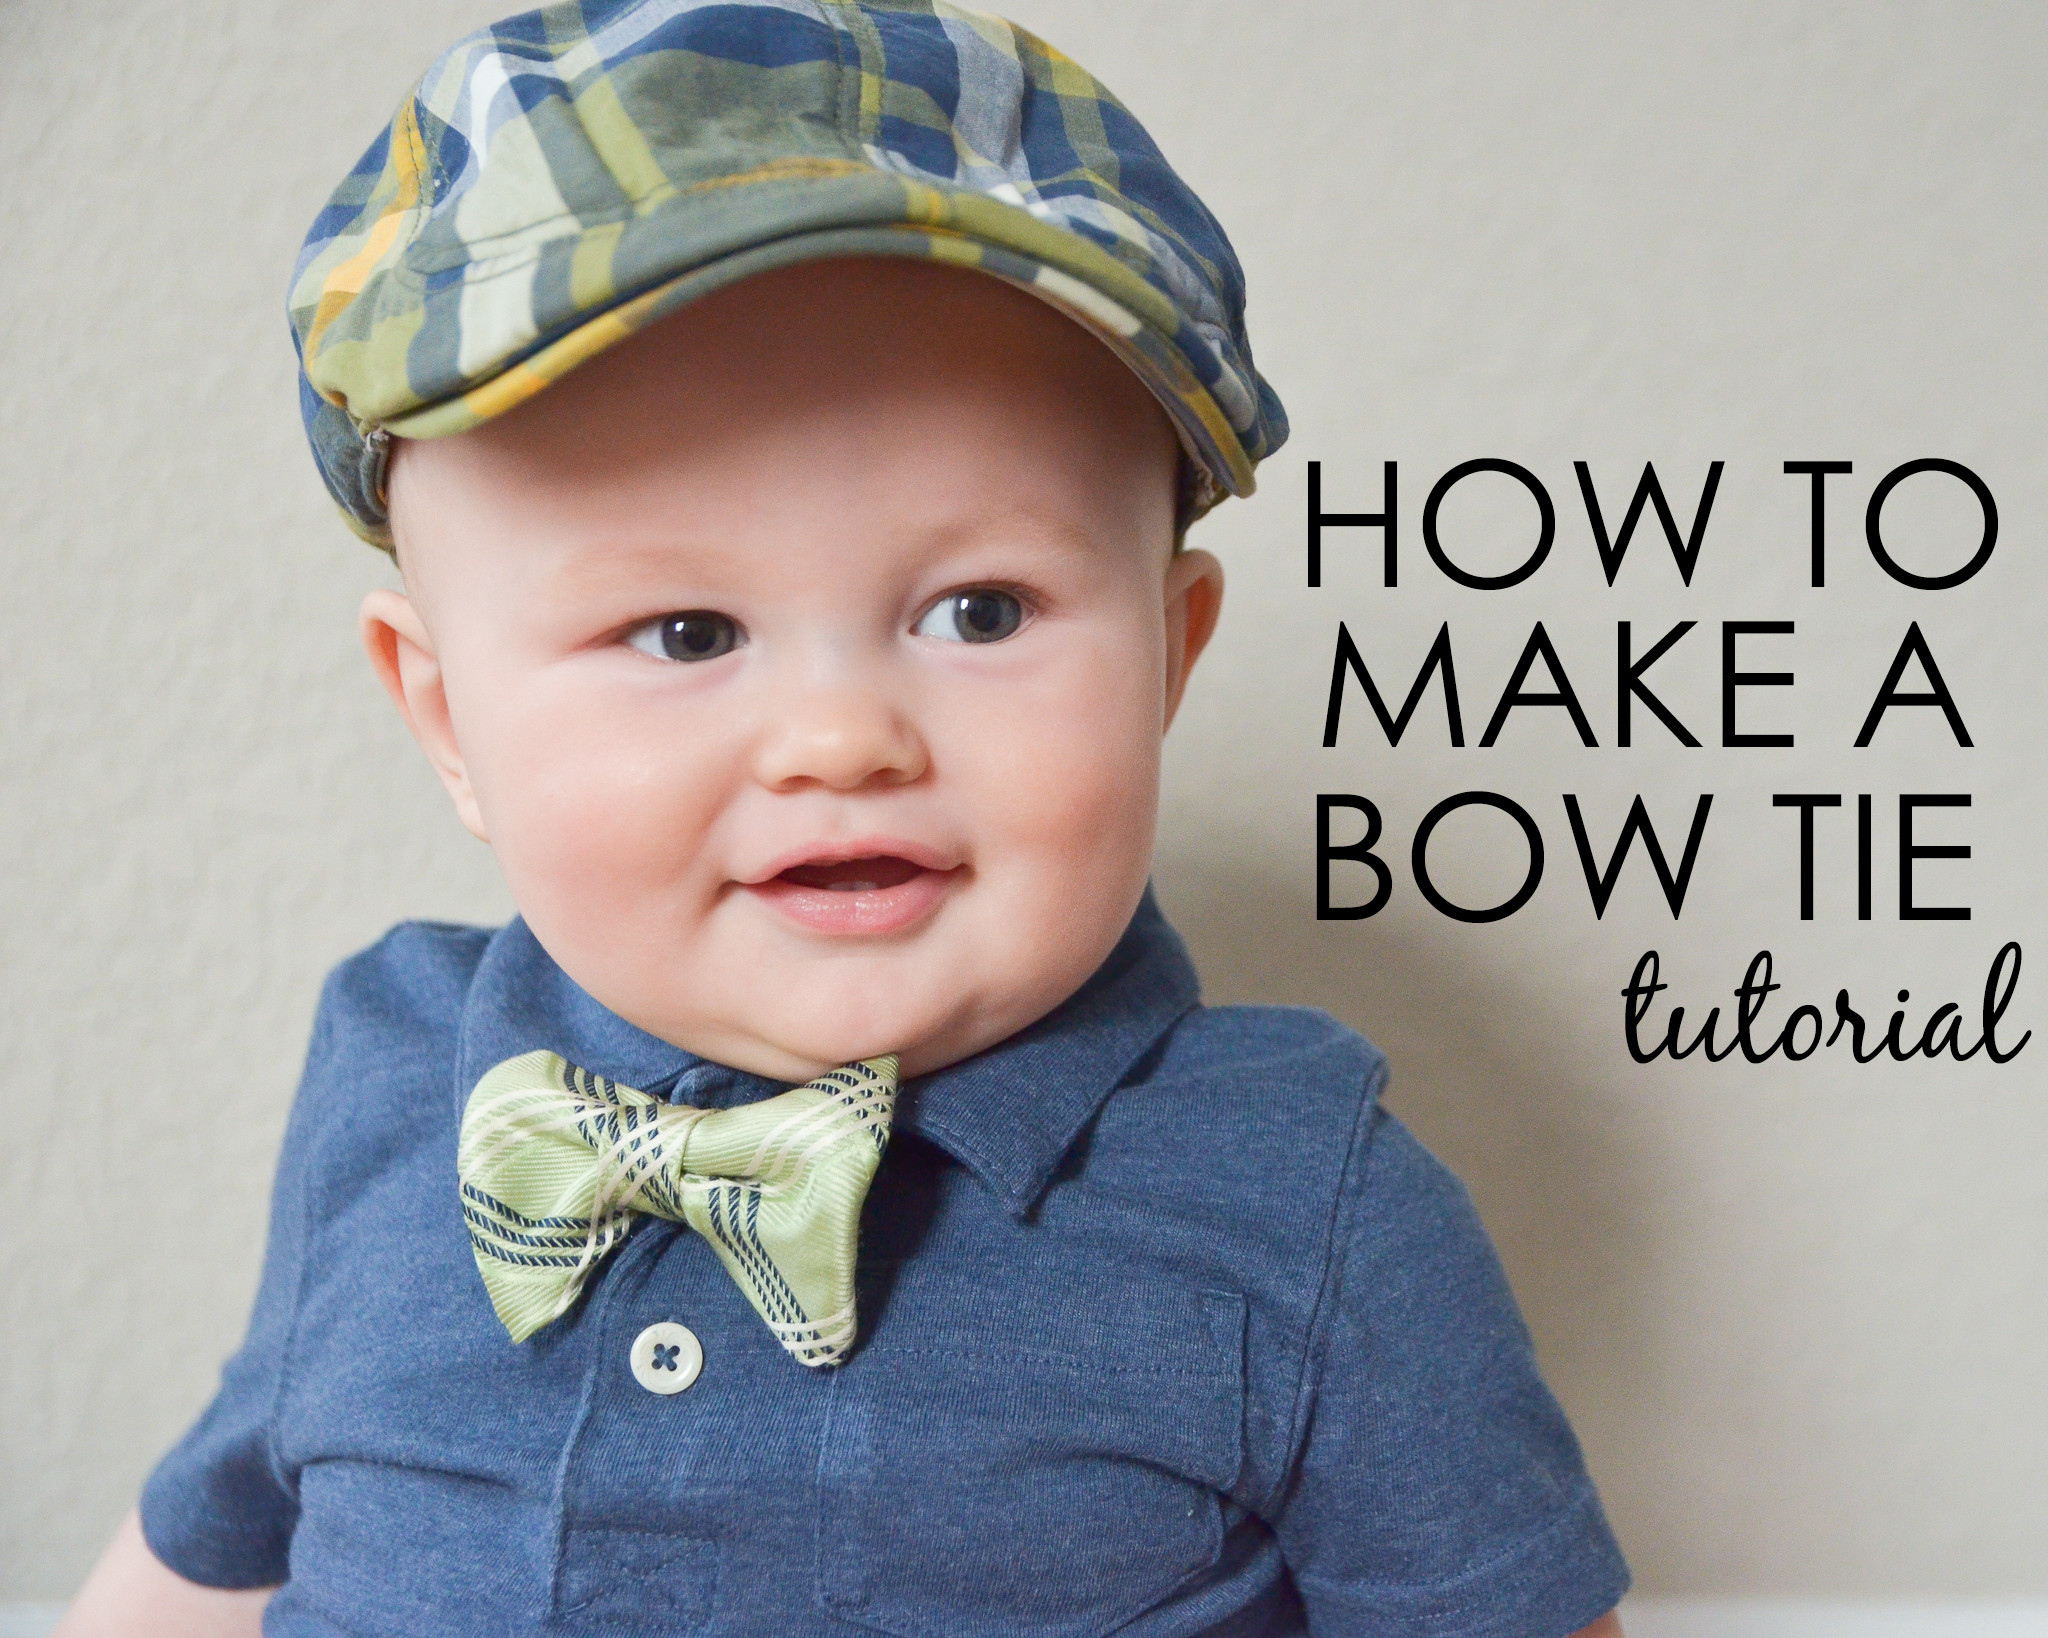 DIY Toddler Bow Tie
 How to Sew a Bow